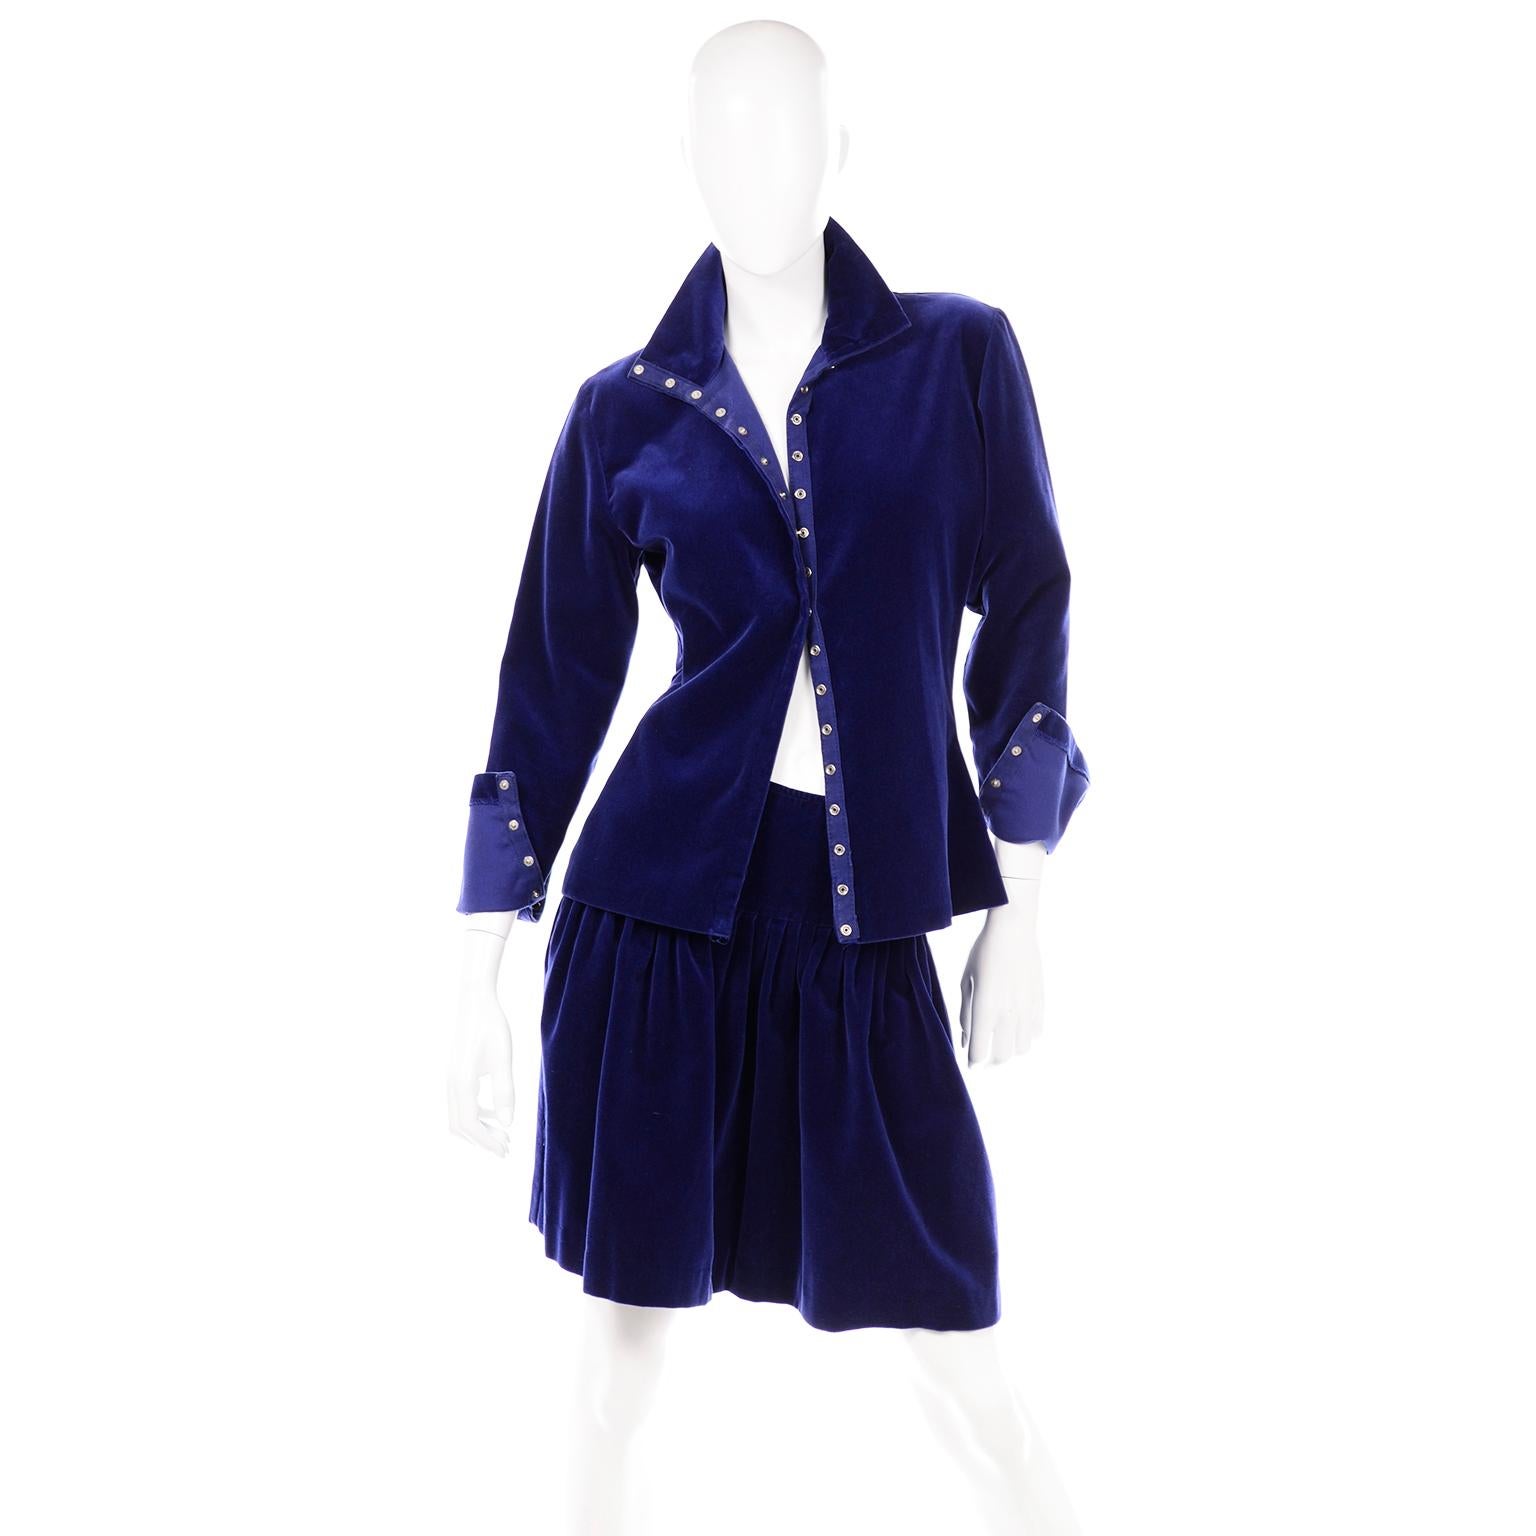 Norma Kamali was designing athleisure wear before there was a name for it!  She is one of our personal favorite designers and always search for her vintage pieces.  This is a two piece avant garde luxe royal blue velvet 2 piece evening dress